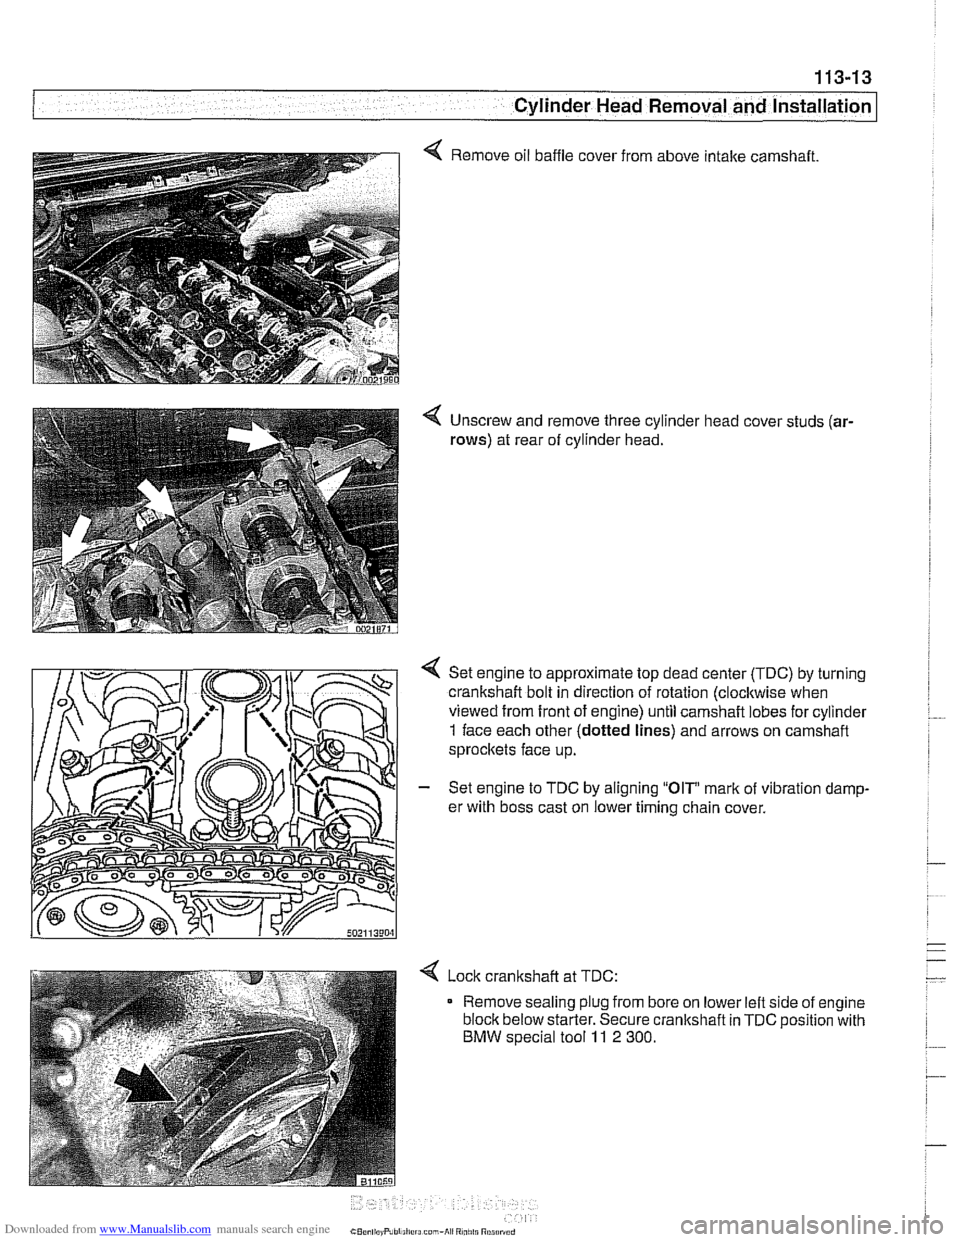 BMW 530i 2001 E39 Workshop Manual Downloaded from www.Manualslib.com manuals search engine 
- - , -. I Cylinder Head Removal and lnstallatio~ 
4 Remove oil baffle  cover from  above intake camshaft. 
4 Unscrew  and remove  three cylin